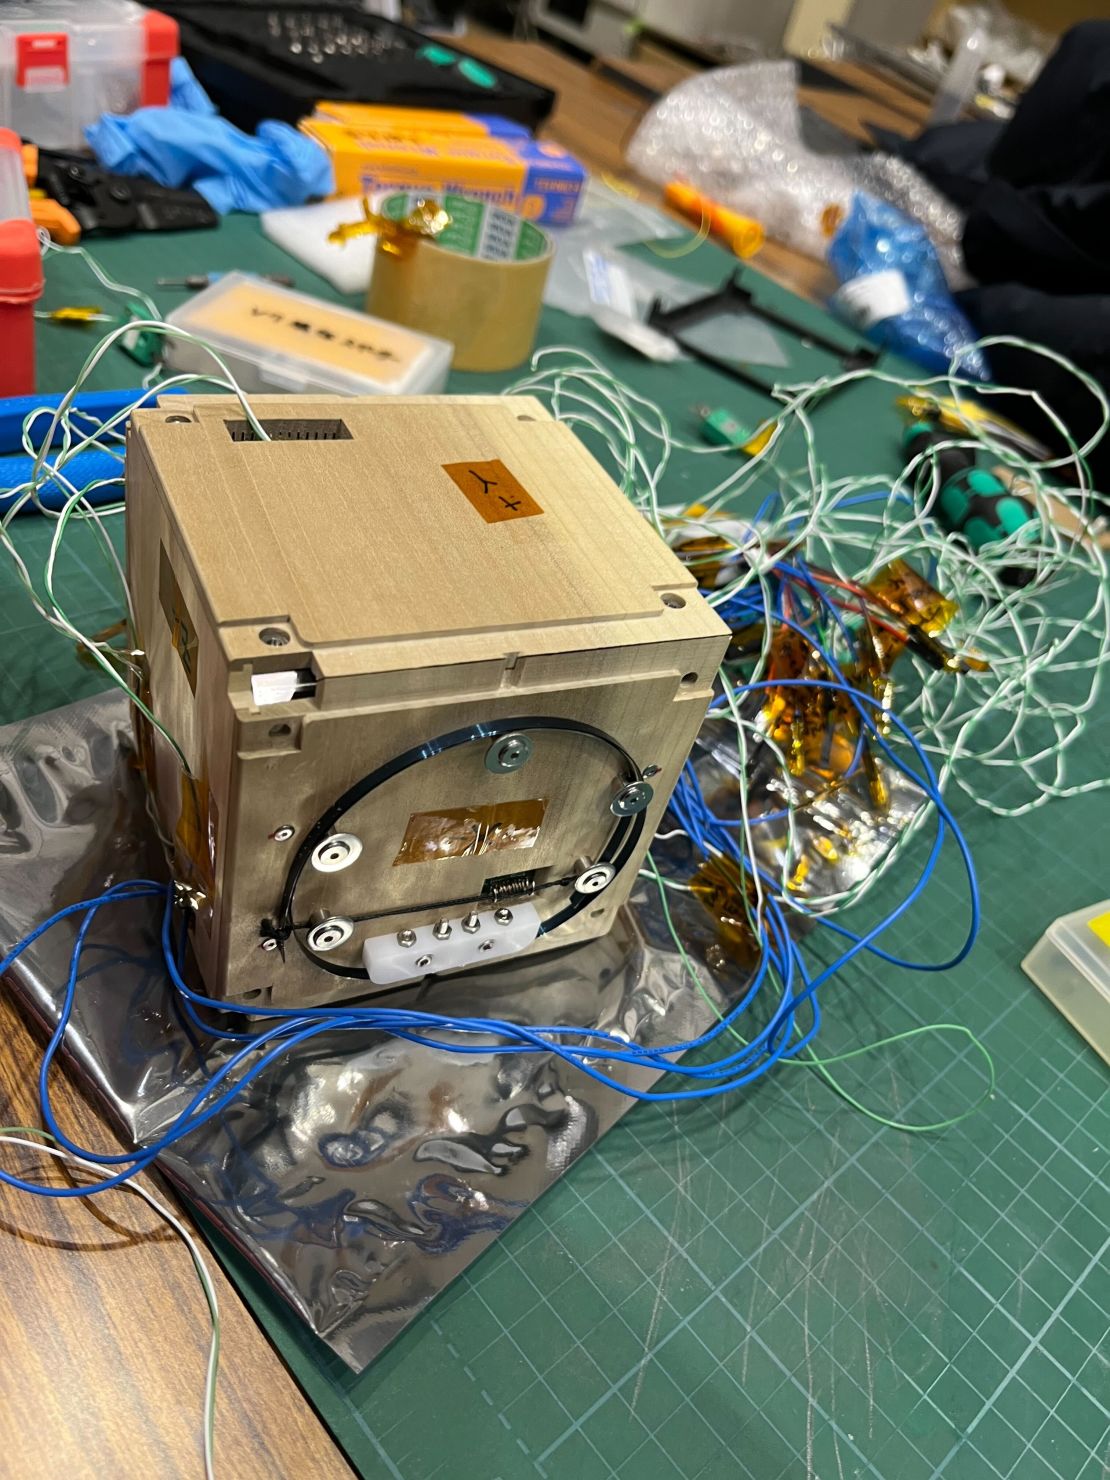 Engineers at Kyoto University are building a wooden satellite that will be launched into space in a joint mission with JAXA and NASA. Sourced for Tech for Good 2023.